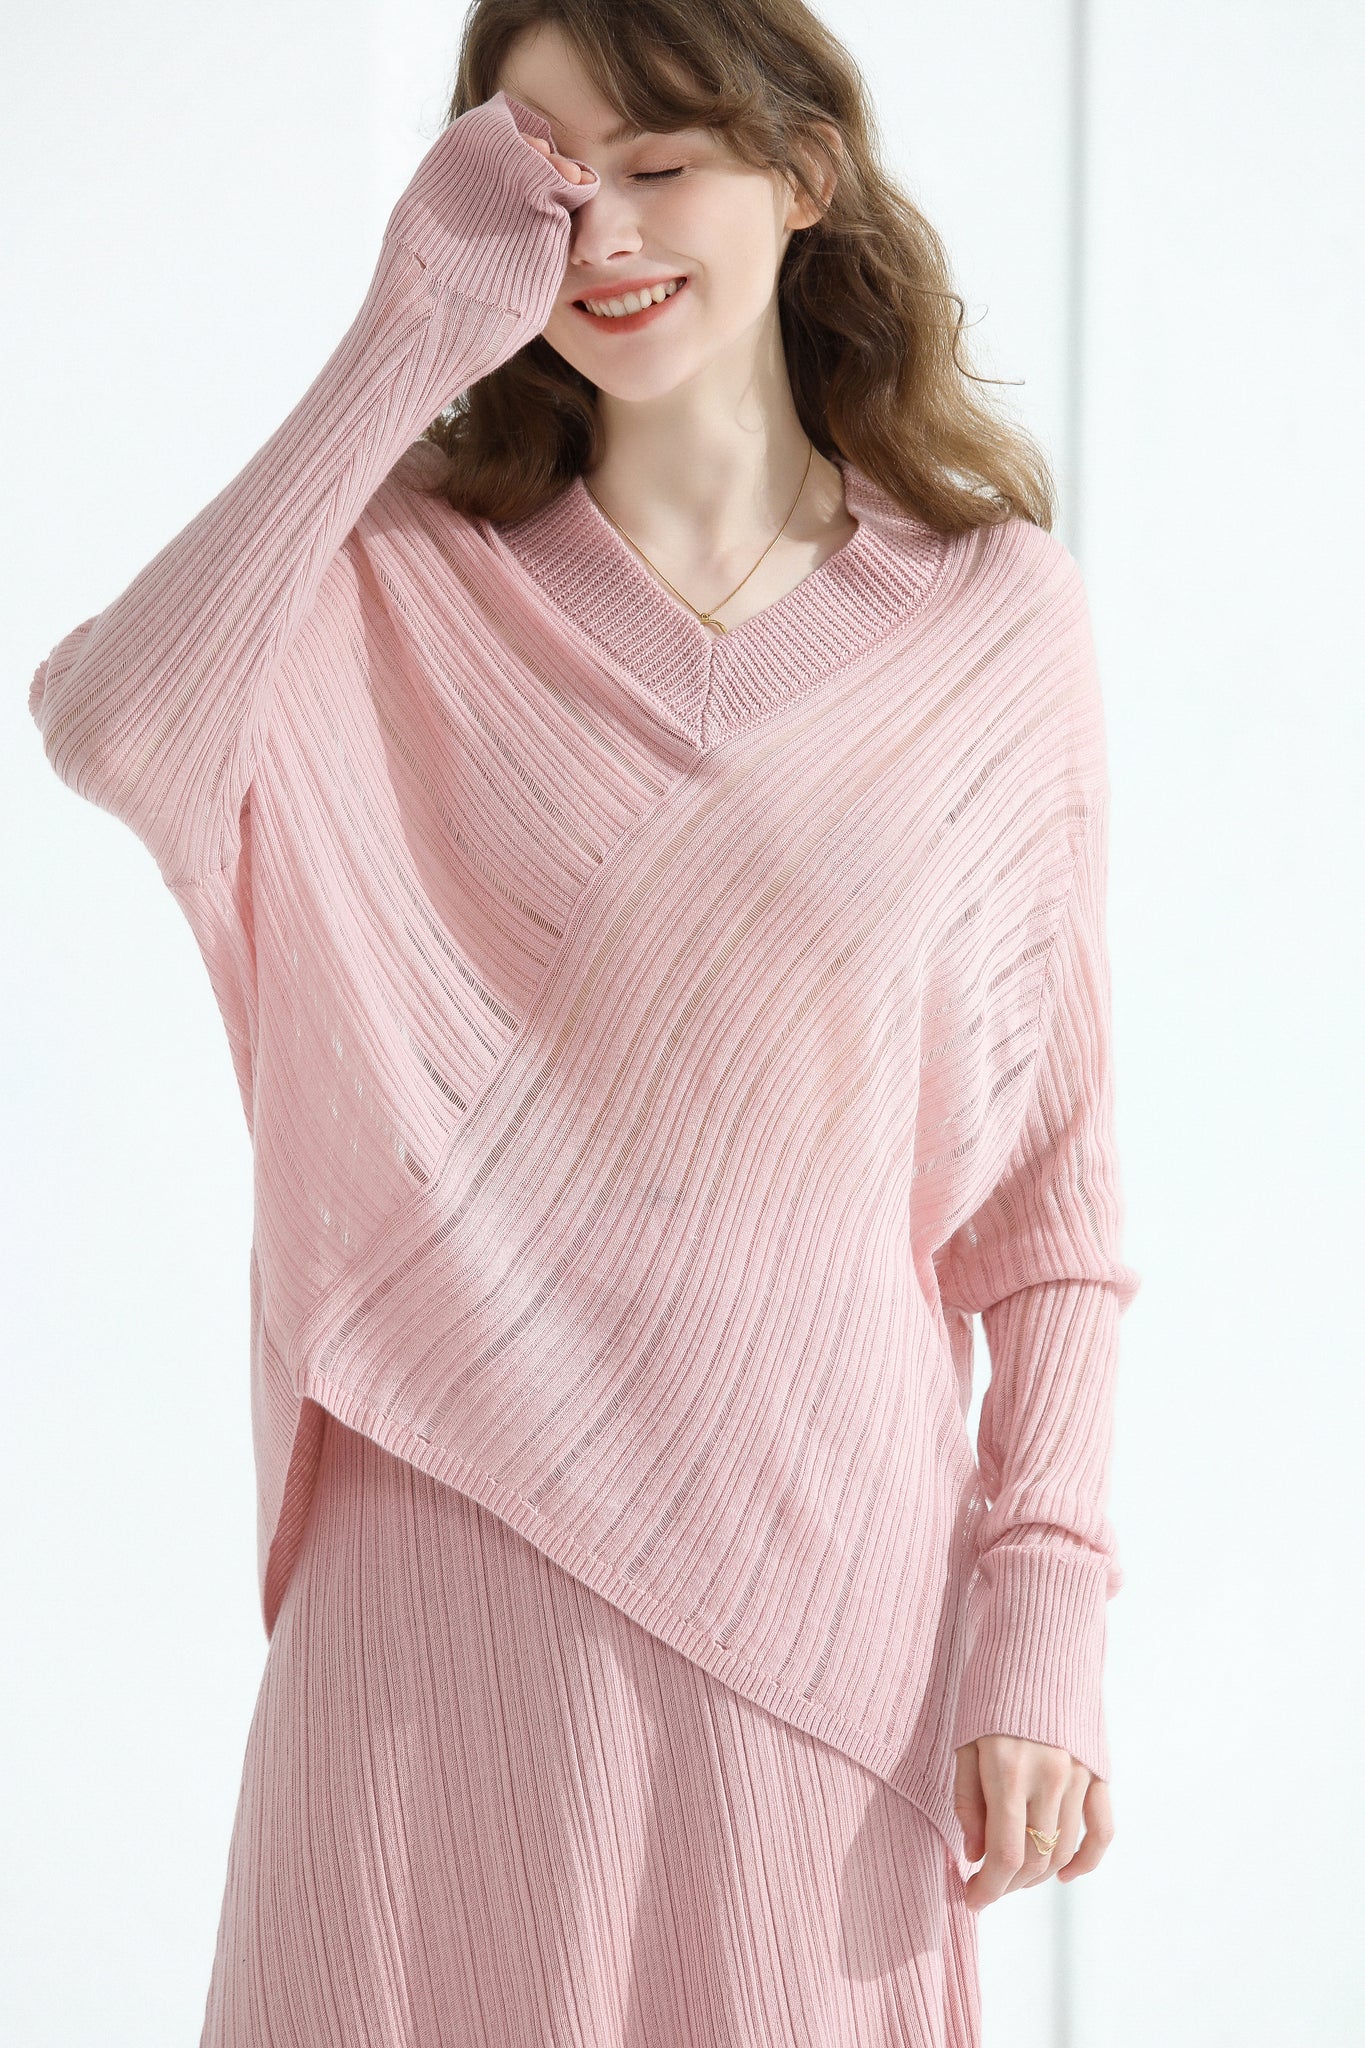 Sylphide | Amour Pink Wool Blend Knit Top